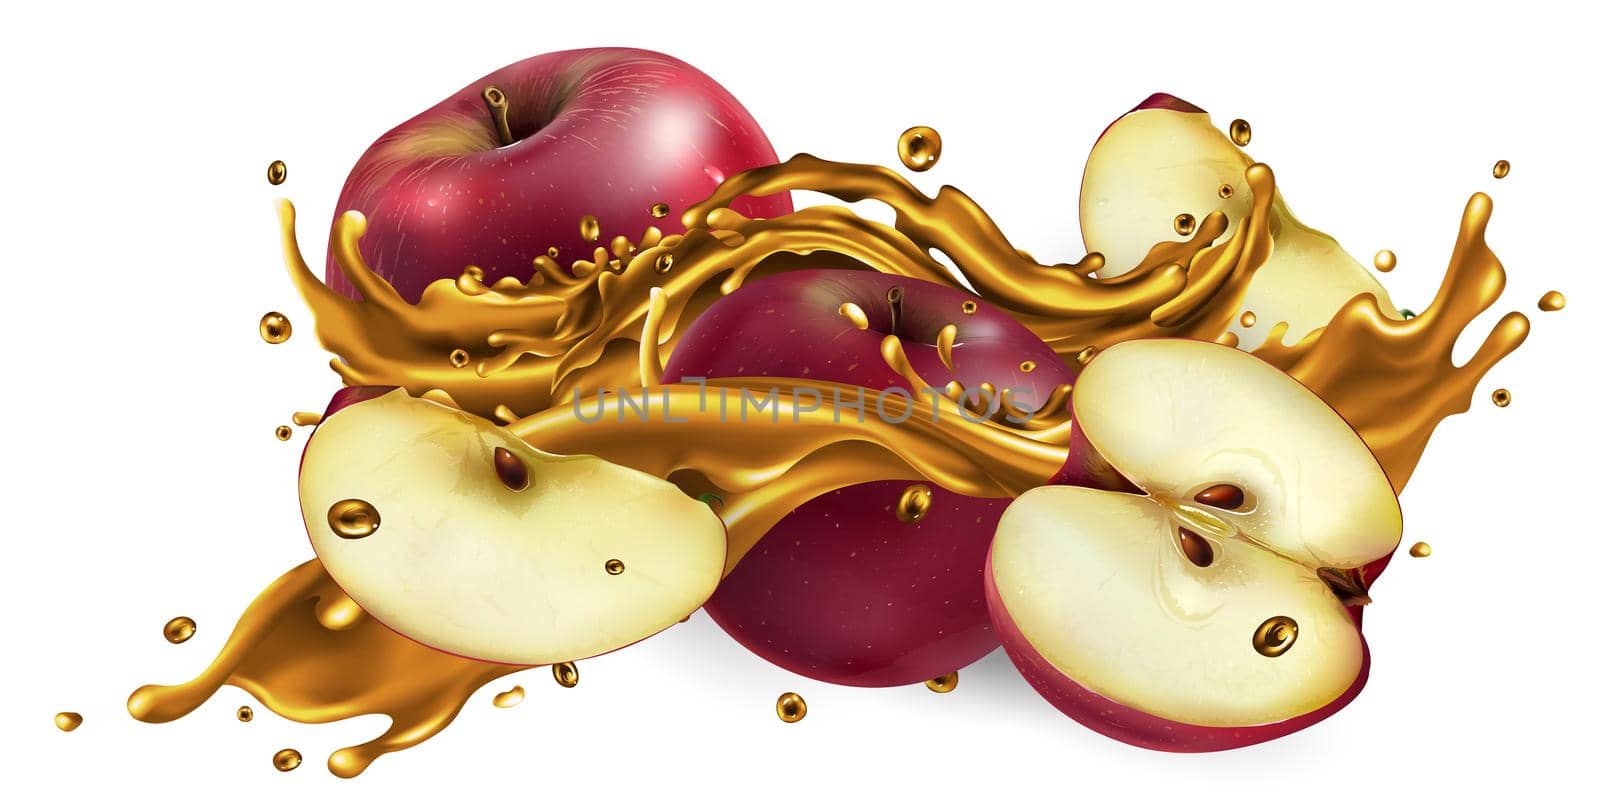 Whole and sliced red apples and a splash of fruit juice on a white background. Realistic style illustration.